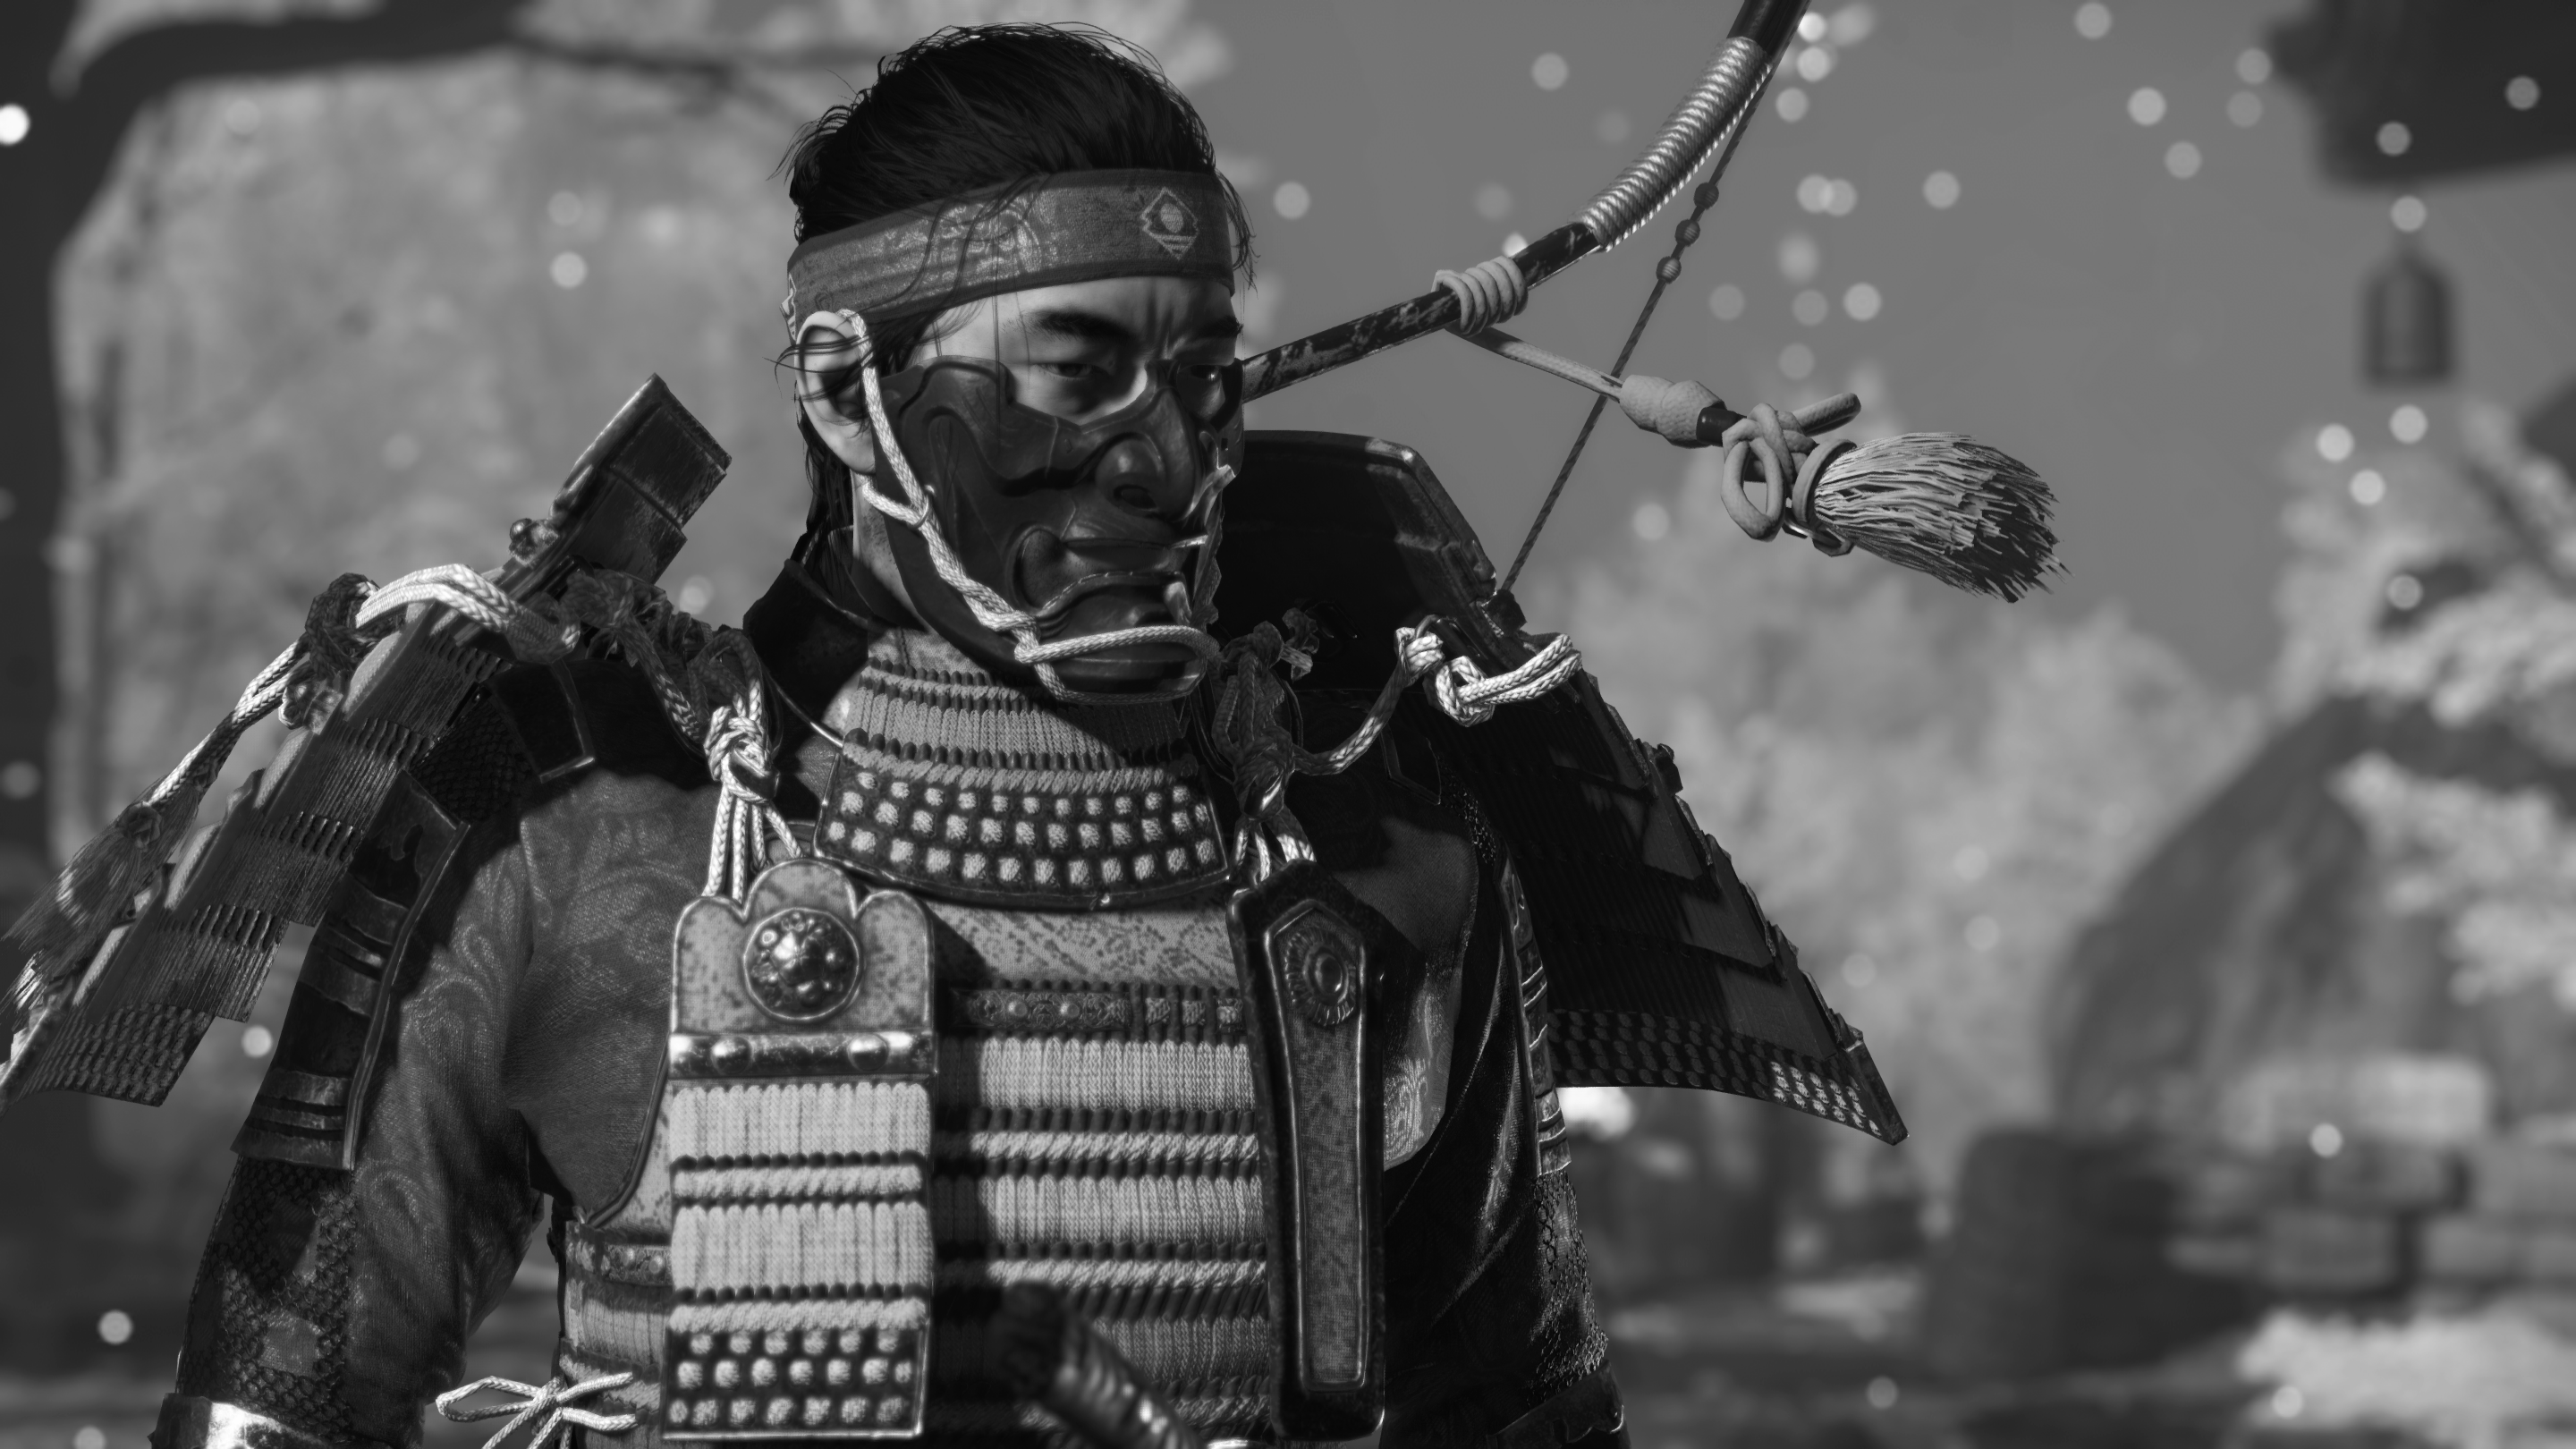 General 2880x1620 Ghost of Tsushima  samurai monochrome armor Japanese Garden low saturation cherry blossom Jin Sakai video games video game characters Sucker Punch Productions